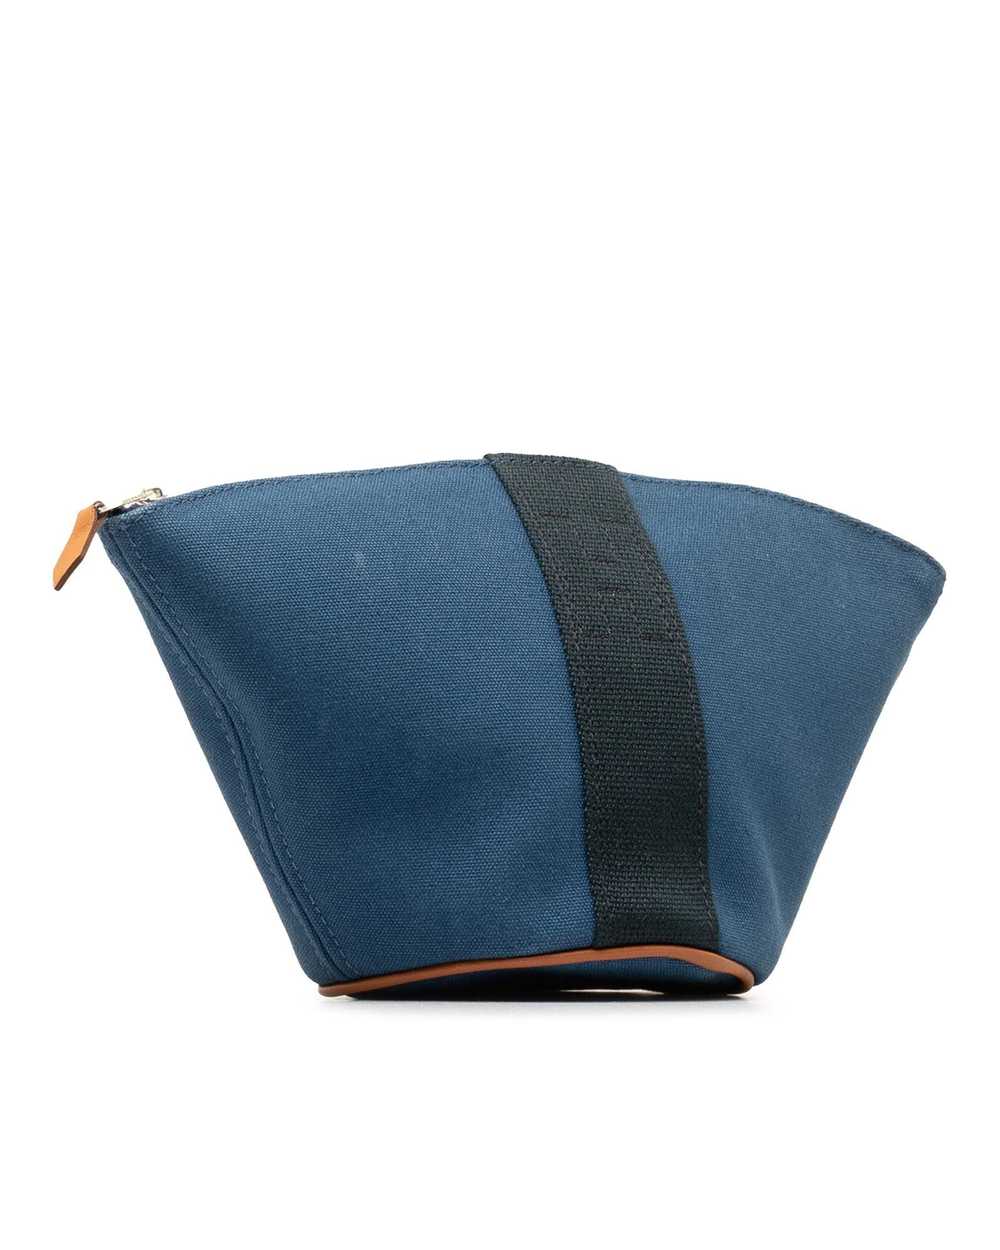 Hermes Canvas and Leather Top Zip Pouch - image 2